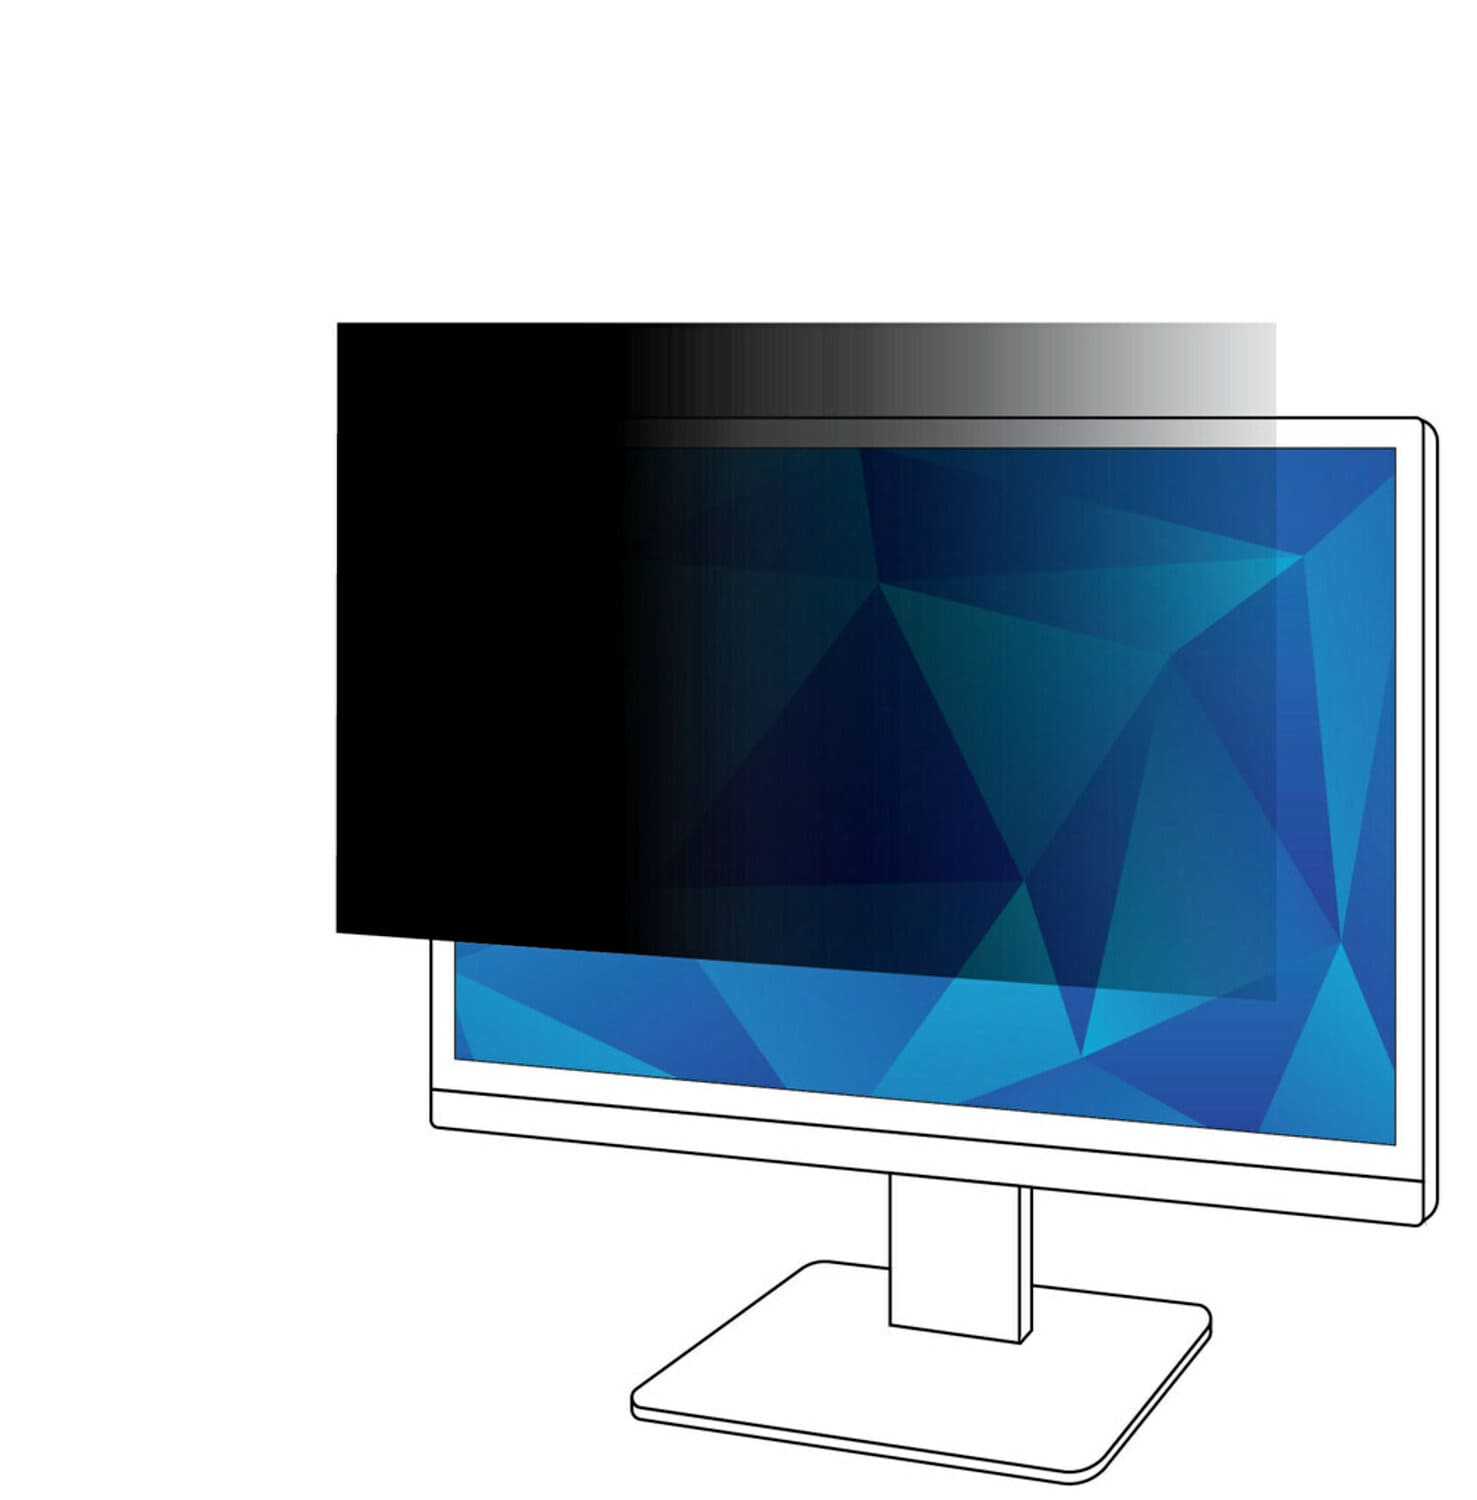 7000031980 - 3M Privacy Filter for 27in Monitor, 16:9, PF270W9B